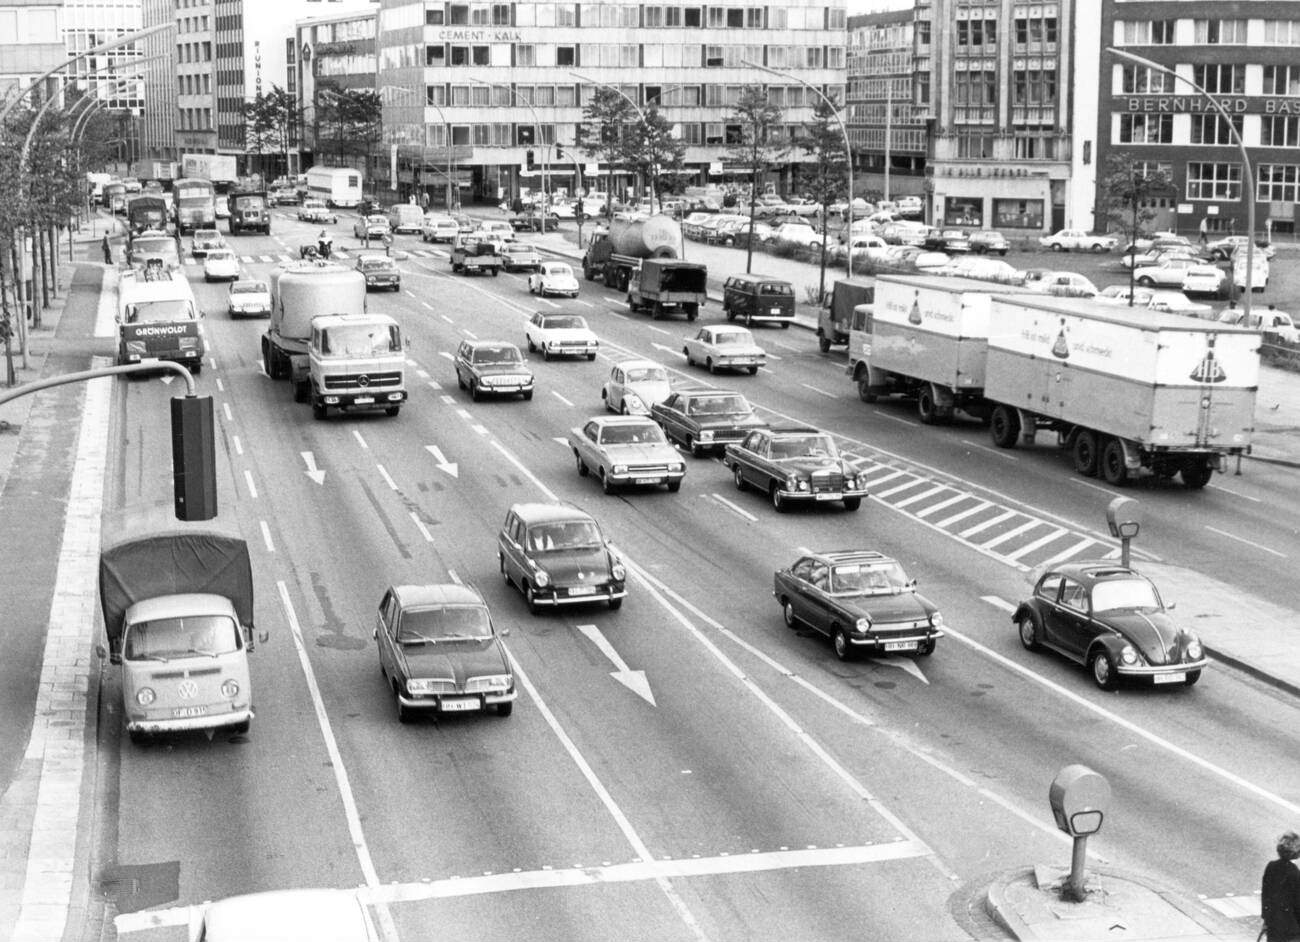 A view of Willy-Brandt-Strasse in Hamburg, Germany on September 23, 1970.